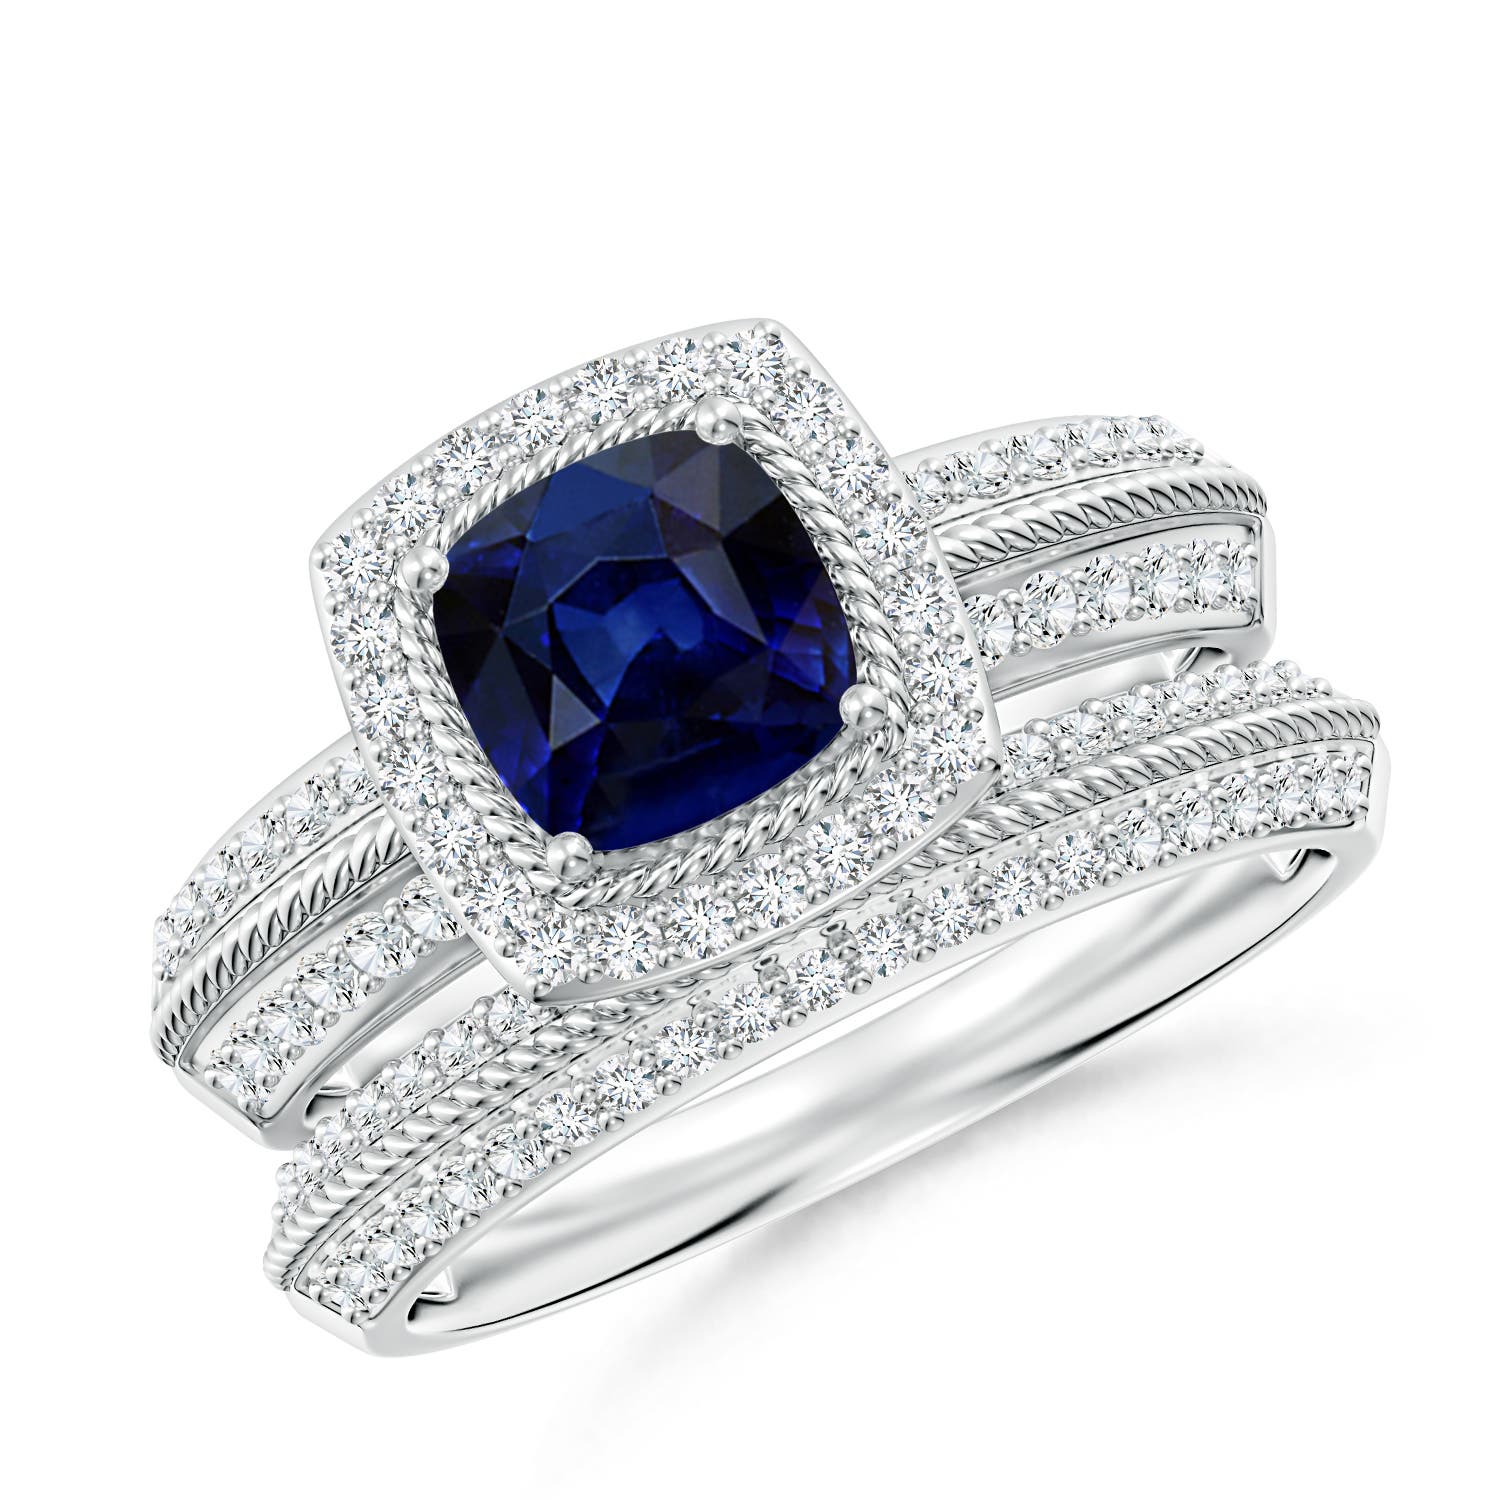 AAA - Blue Sapphire / 1.63 CT / 14 KT White Gold